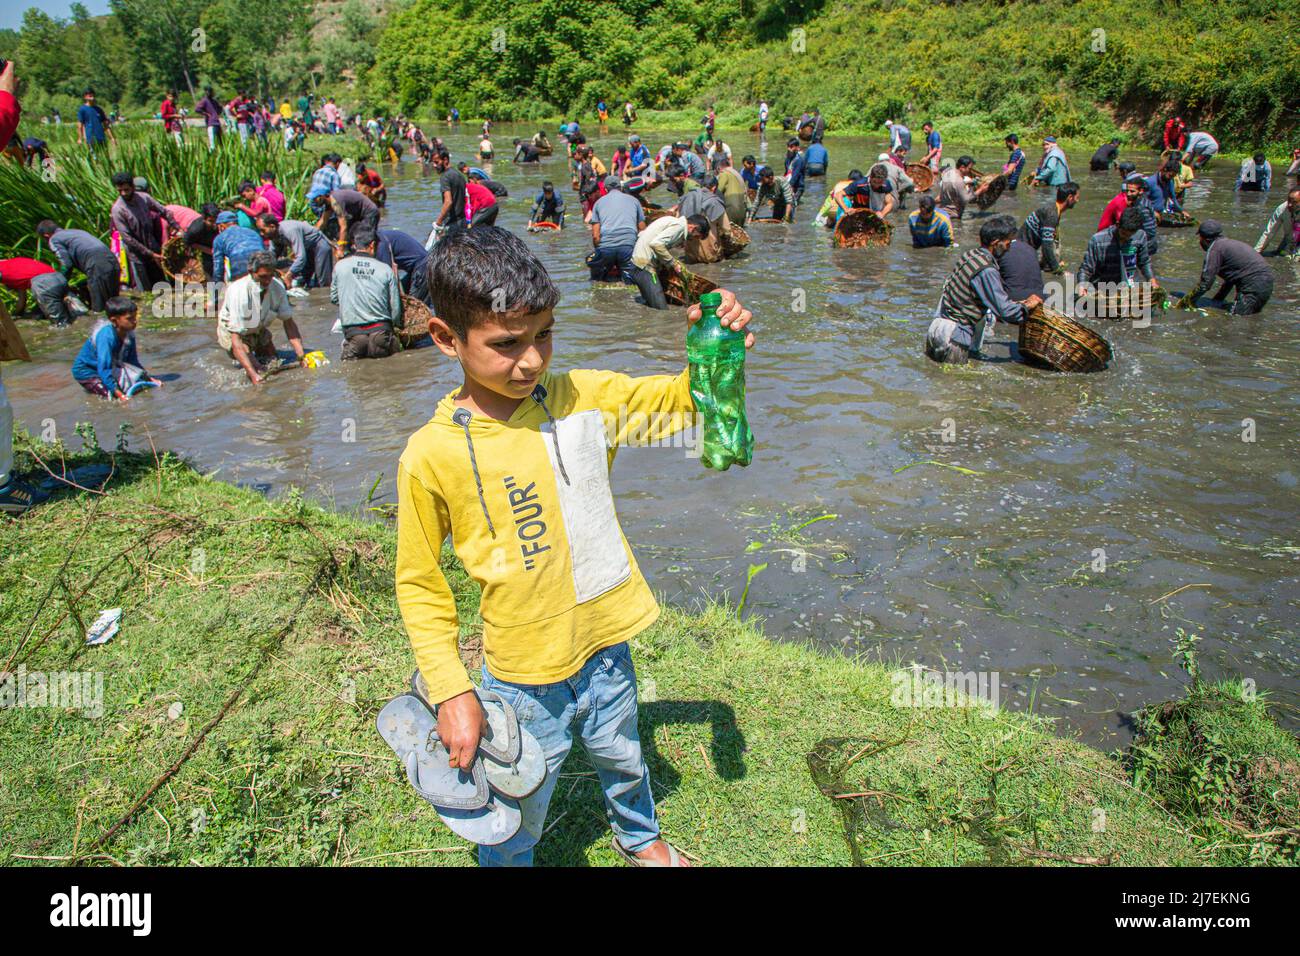 https://c8.alamy.com/comp/2J7EKNG/a-boy-shows-off-a-bottle-filled-with-fish-as-hundreds-of-kashmiri-men-and-children-with-wicker-baskets-clean-and-fish-through-the-weeds-at-a-natural-spring-locally-known-as-panzath-nag-during-an-annual-cleaning-and-fishing-festival-in-south-kashmirs-anantnag-district-every-year-in-the-month-of-may-hundreds-of-villagers-take-a-day-off-to-participate-in-a-cleaning-and-fishing-festival-that-has-been-going-on-for-ages-before-the-paddy-fields-are-plowed-the-activity-rids-the-spring-of-silt-and-weeds-and-restores-its-water-level-for-the-rest-of-the-year-photo-by-faisal-bashir-sopa-images-2J7EKNG.jpg